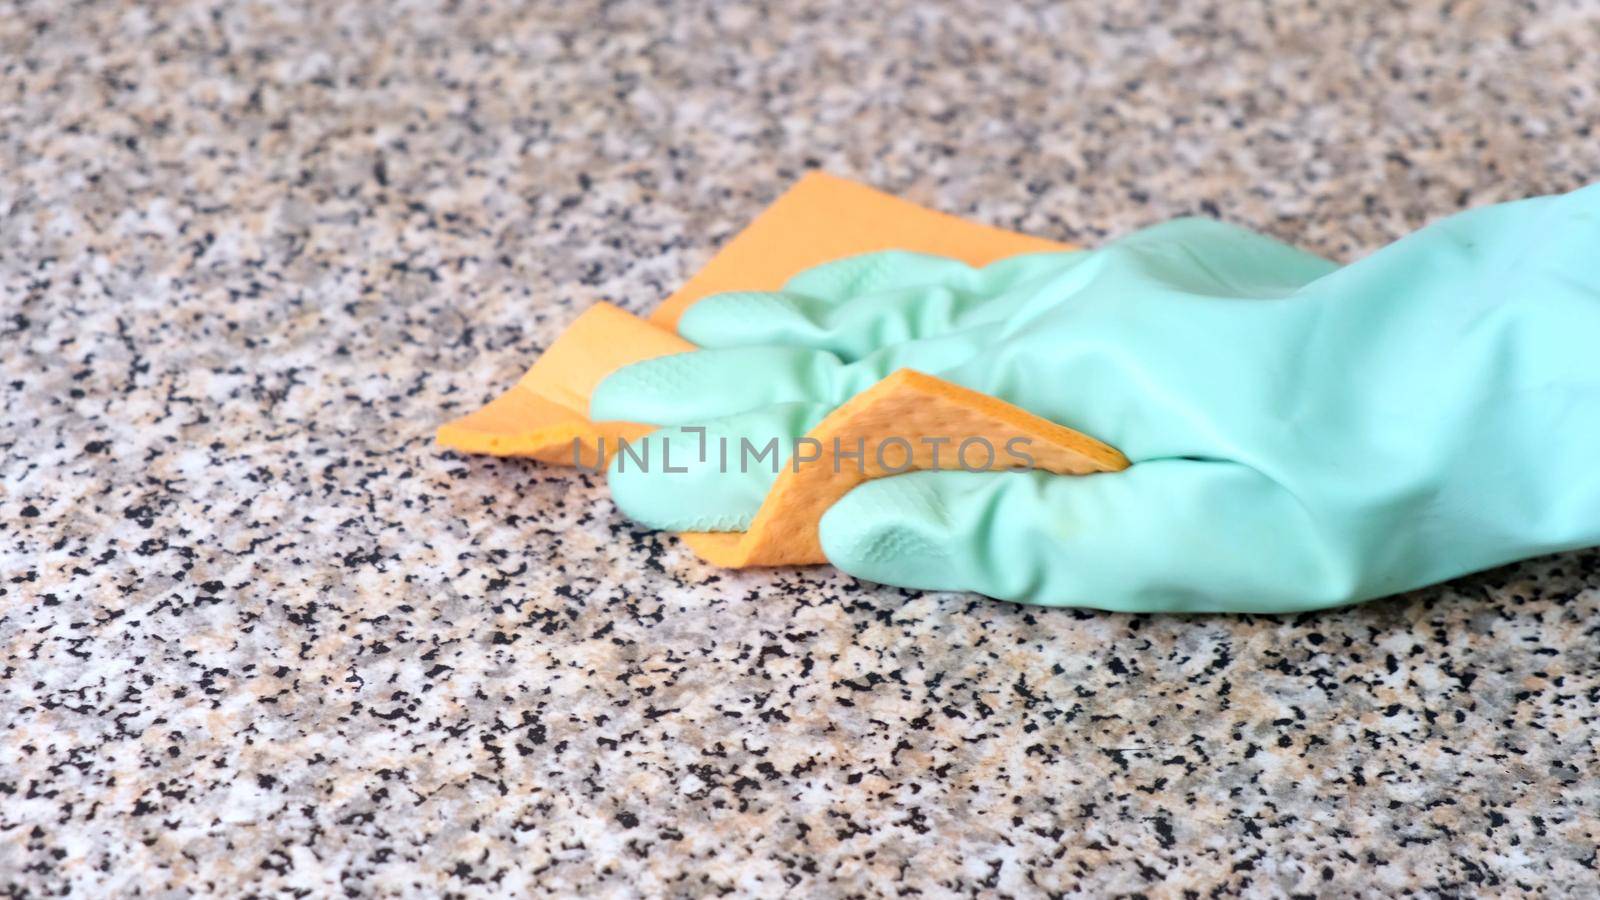 Hand Cleaning Kitchen Work Surface with Rubber Gloves and Disinfectant Spray. The concept of cleaning, help around the house.